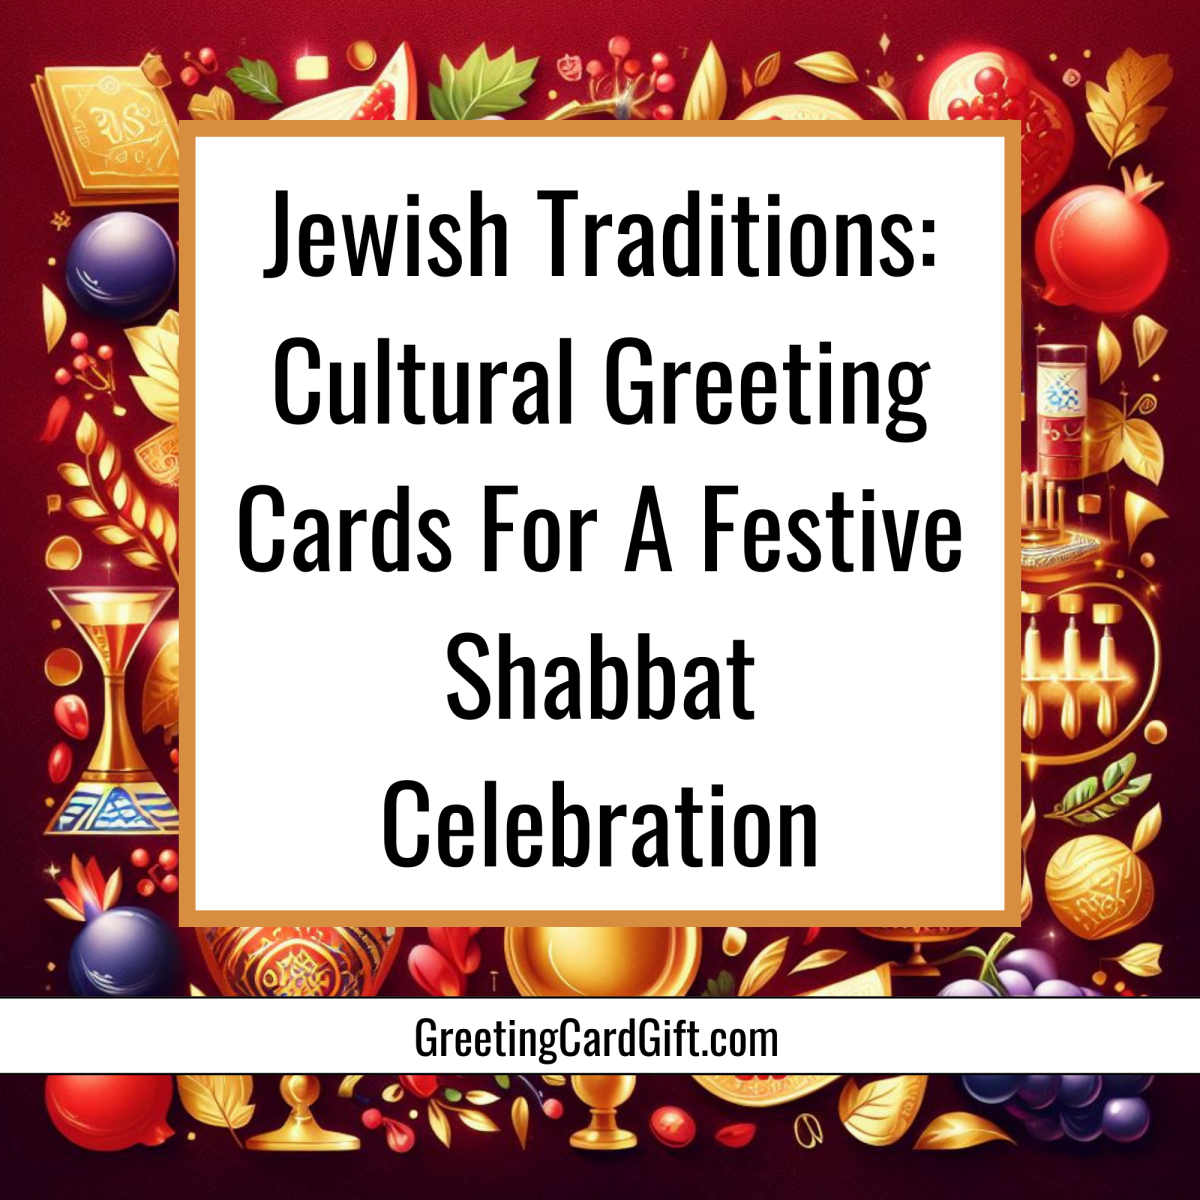 Jewish Traditions: Cultural Greeting Cards For A Festive Shabbat Celebration